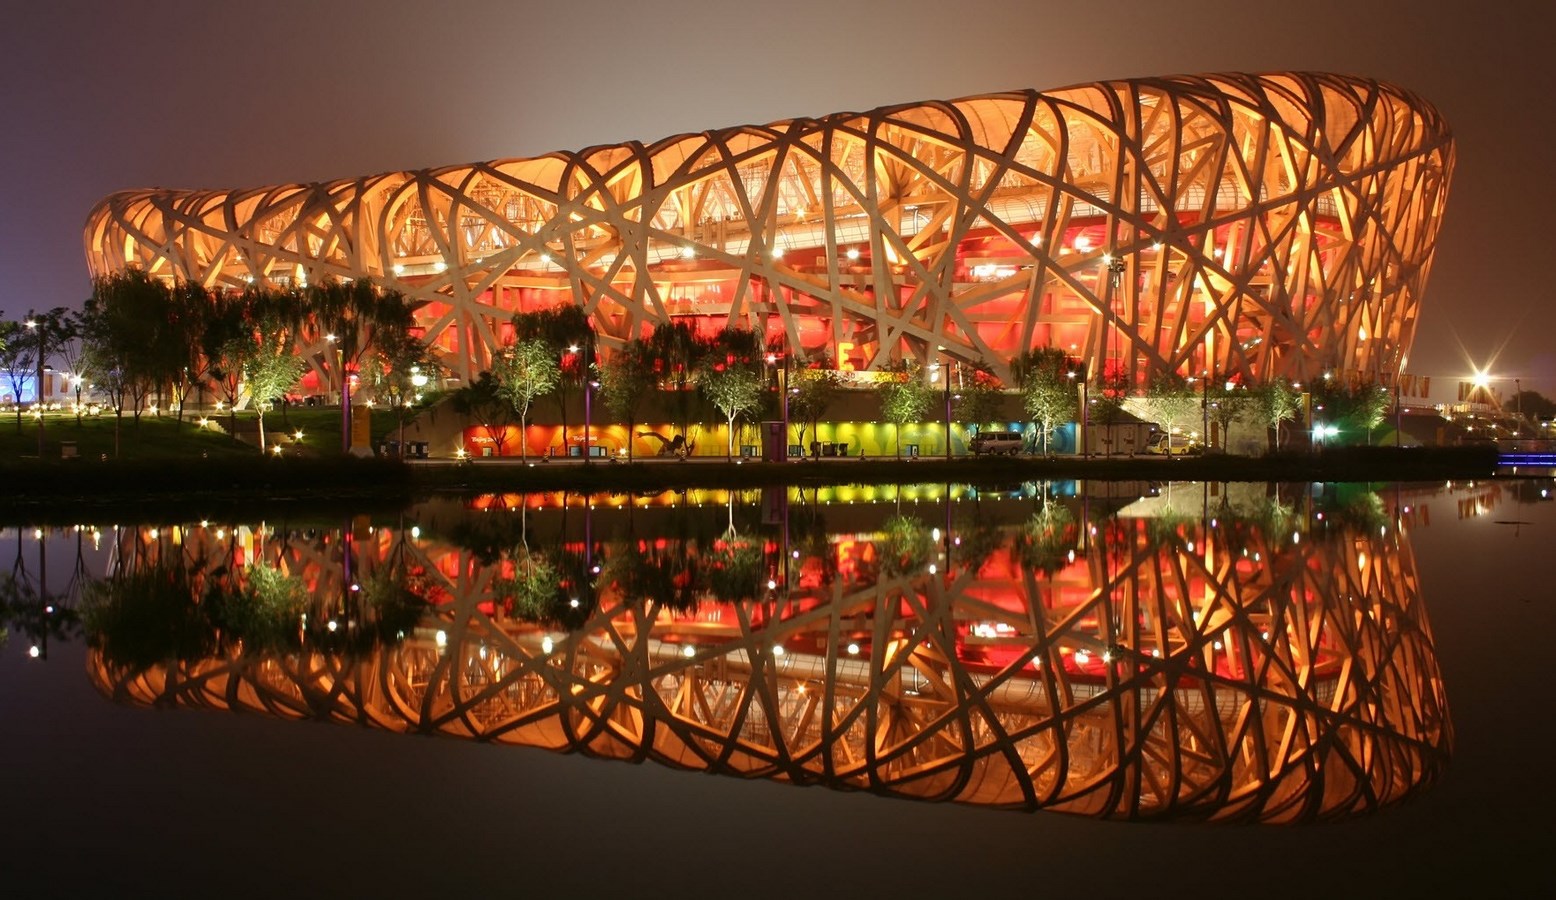 100 Best Architecture Projects of the 21st Century - Beijing National Stadium, China